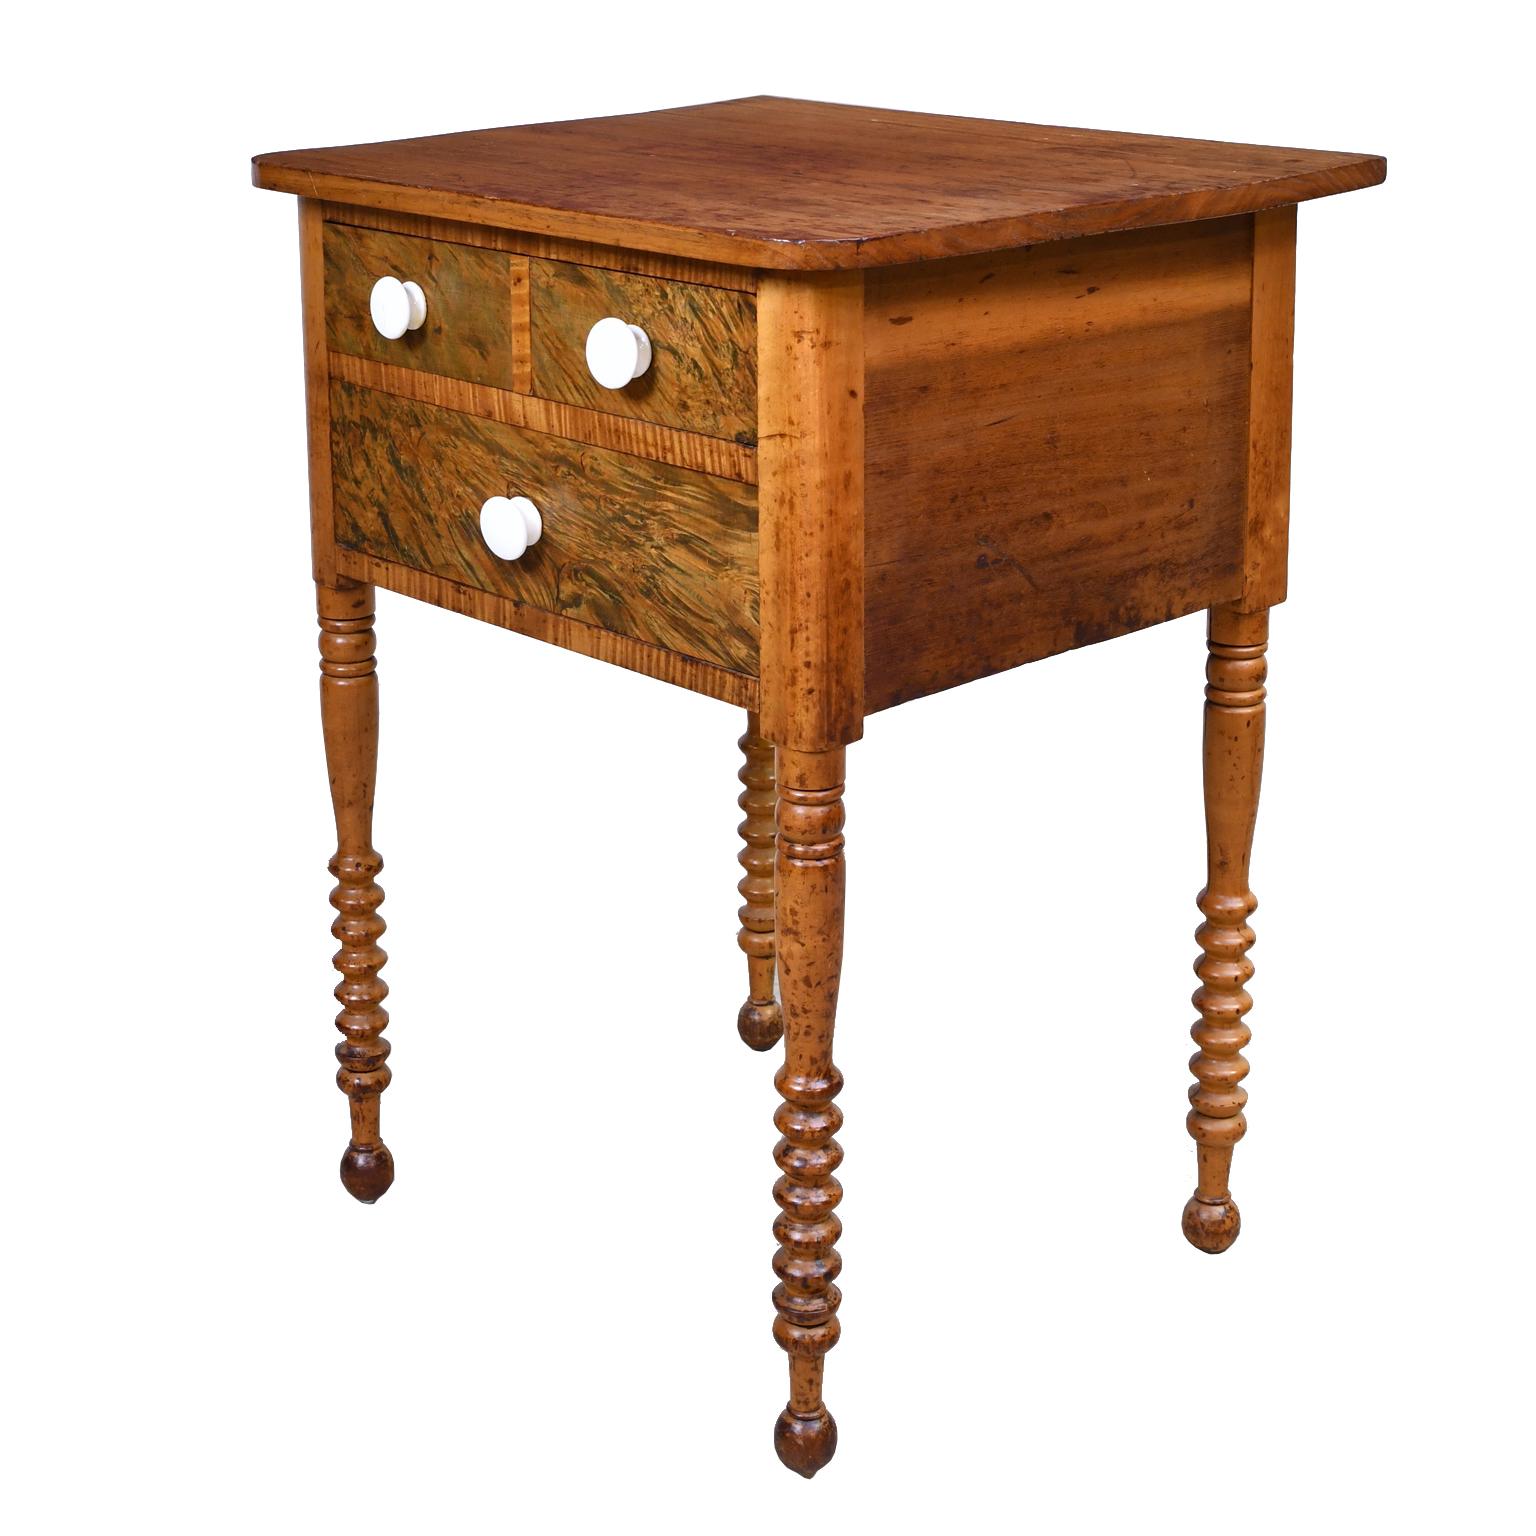 American Federal Country Table or Nightstand in Fruitwood with Drawers, Pennsylvania